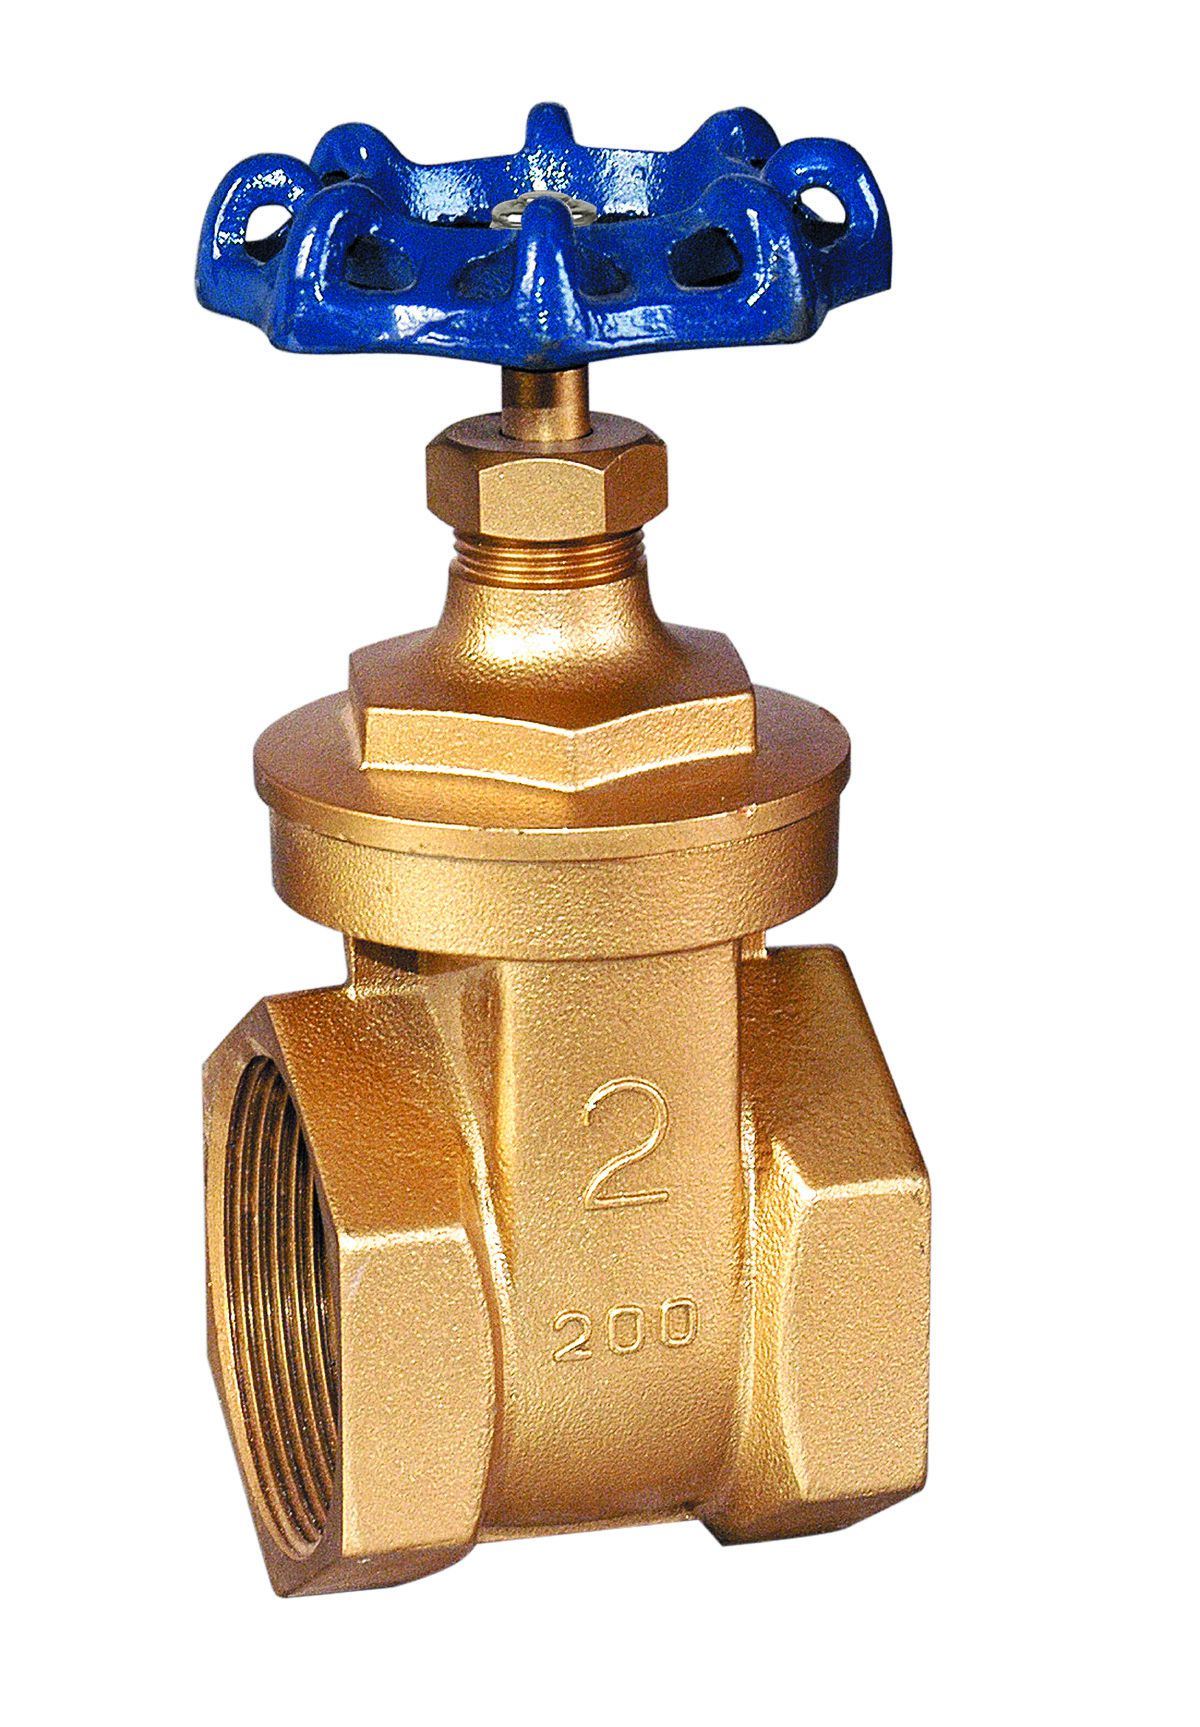 American Standard Brass Gate Valve with NPT Thread for USA